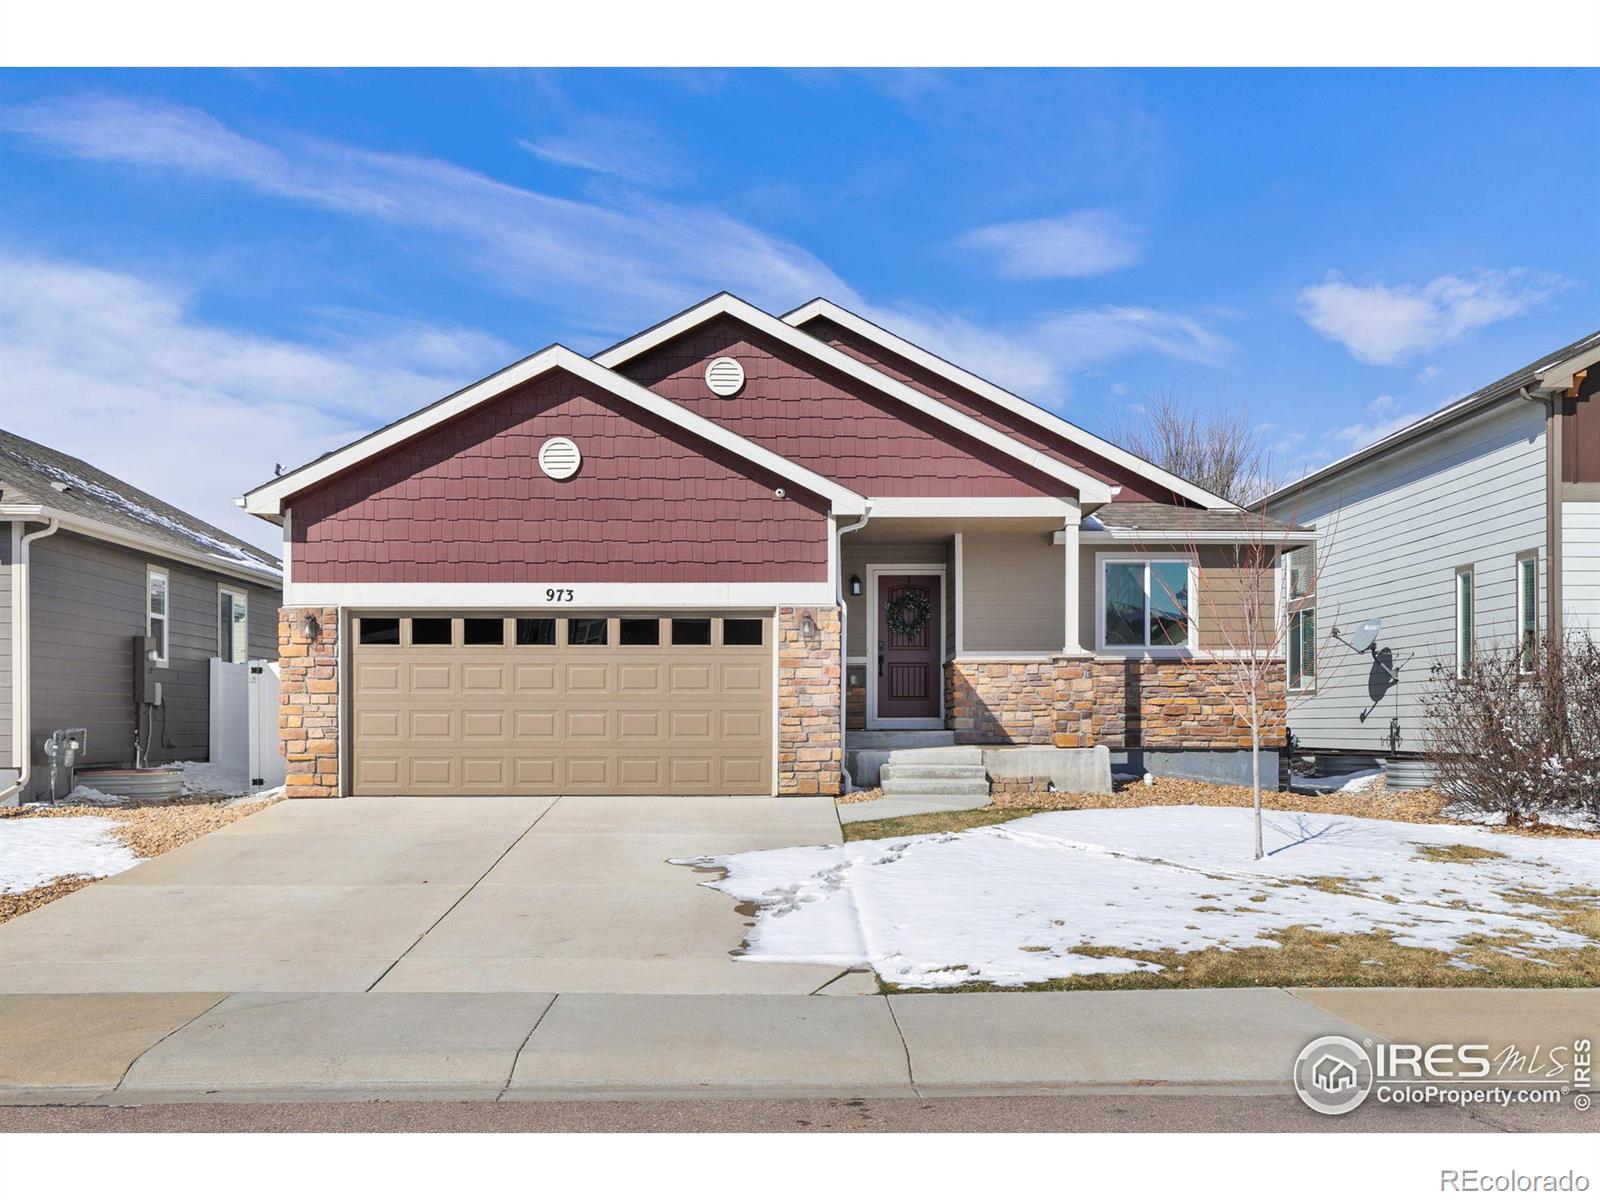 973  lepus drive, Loveland sold home. Closed on 2024-05-03 for $544,000.